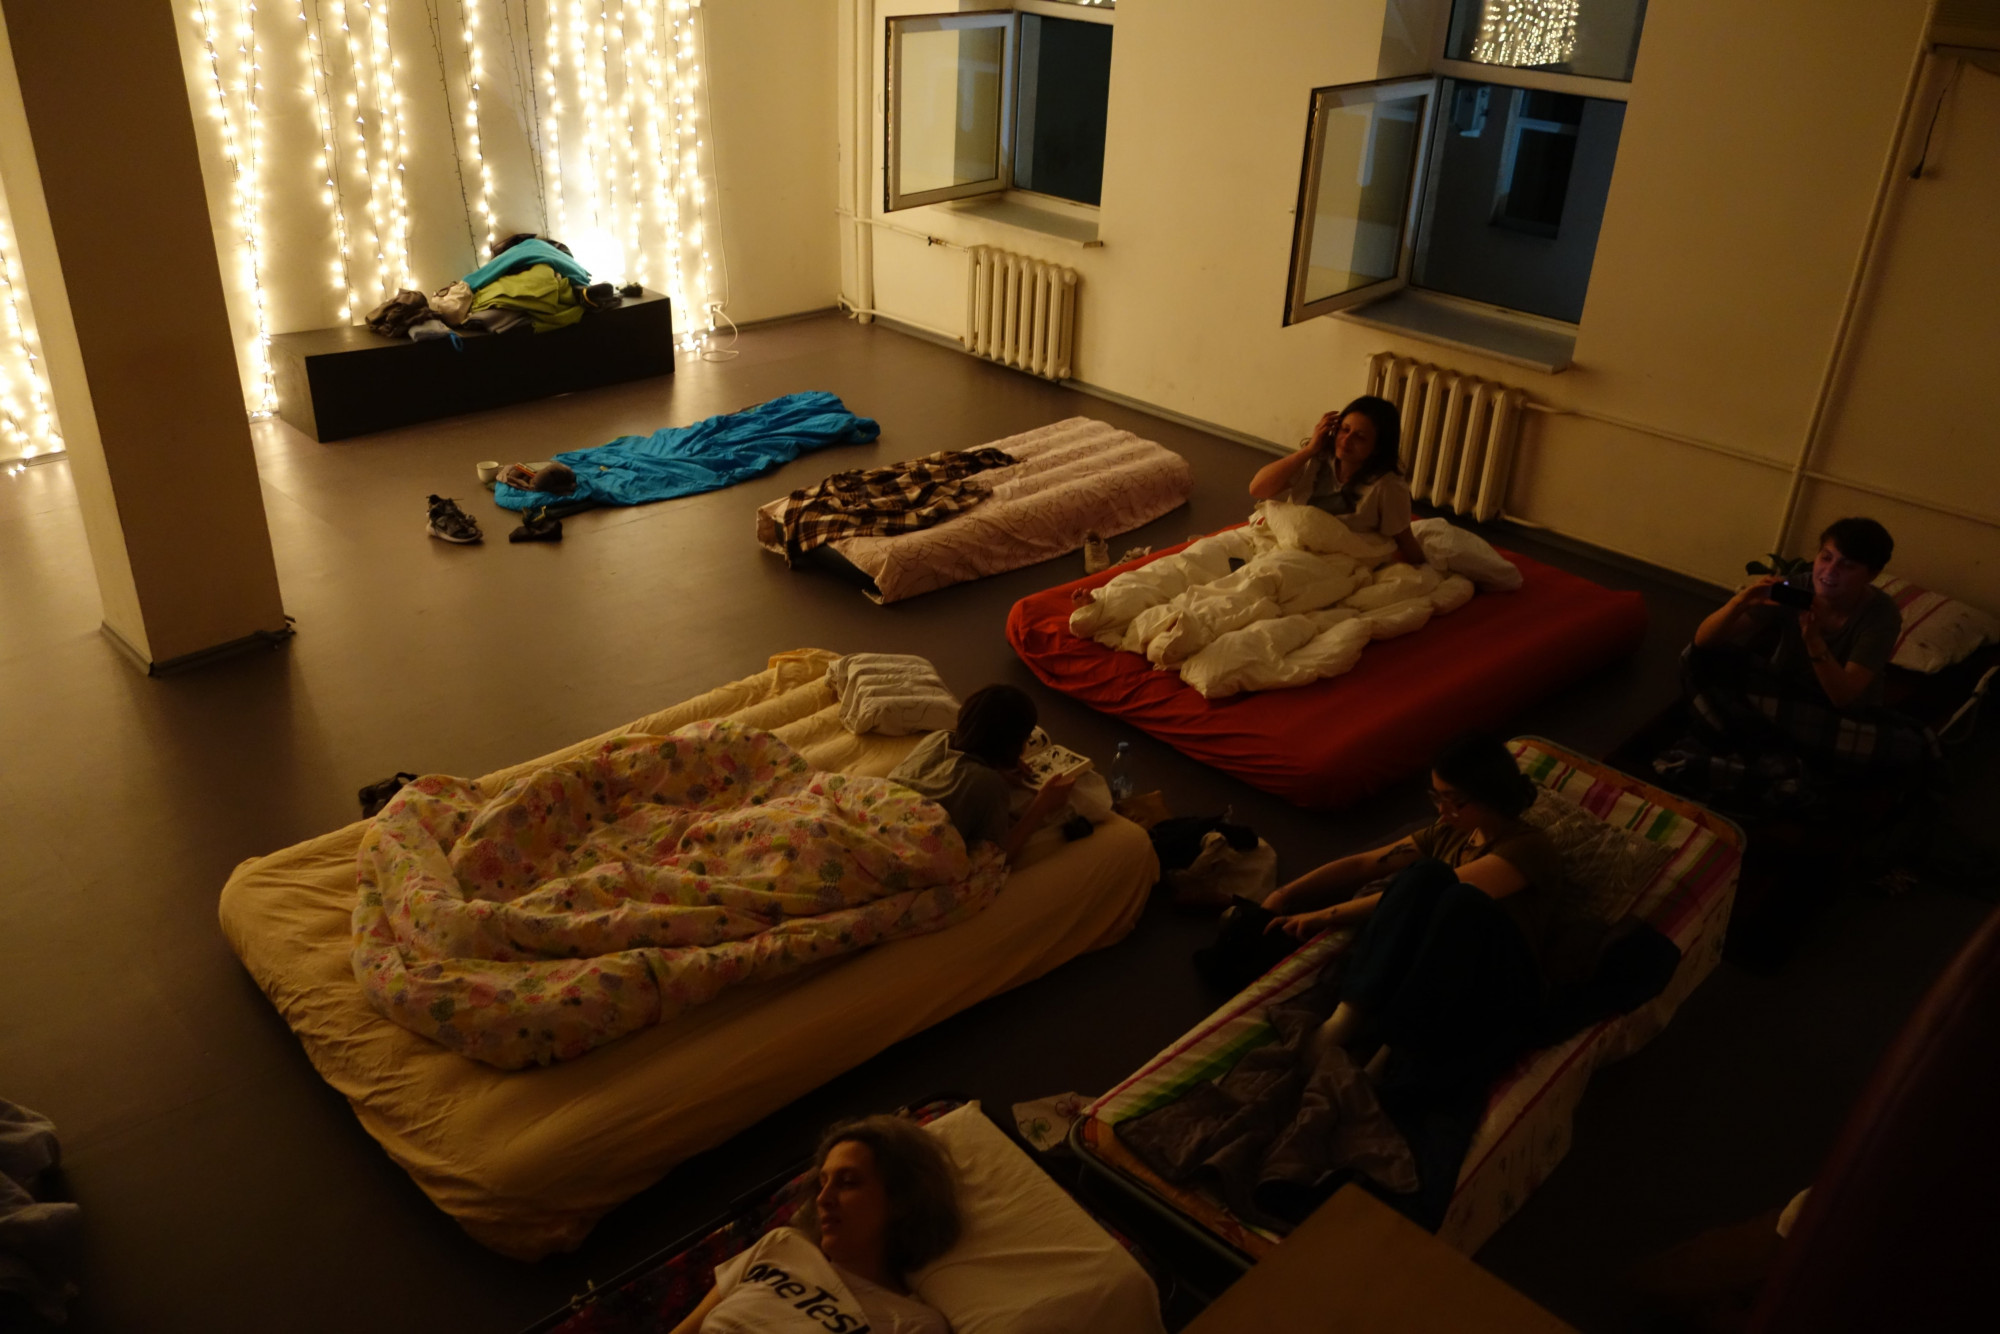 Night of Sleep, 2015. Curated by Vika Marchenkova. Perspective Centre, Moscow